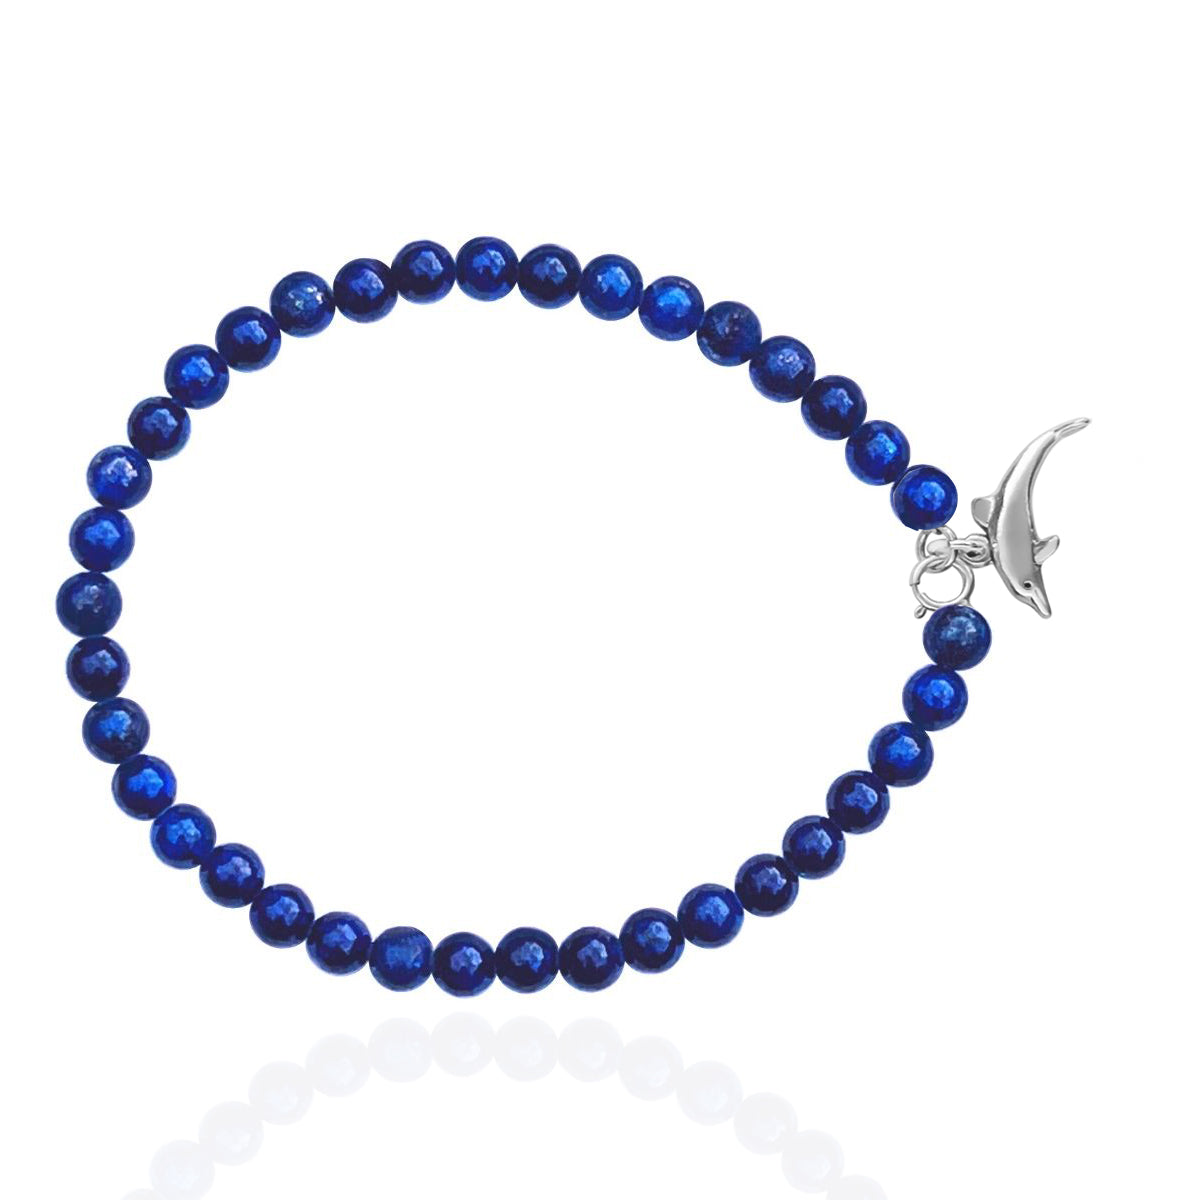 Slip on the Dolphin Spirit Anklet and let the magic of the beach accompany you wherever you roam. It's a symbol of your love for the sea and your carefree, barefoot soul.